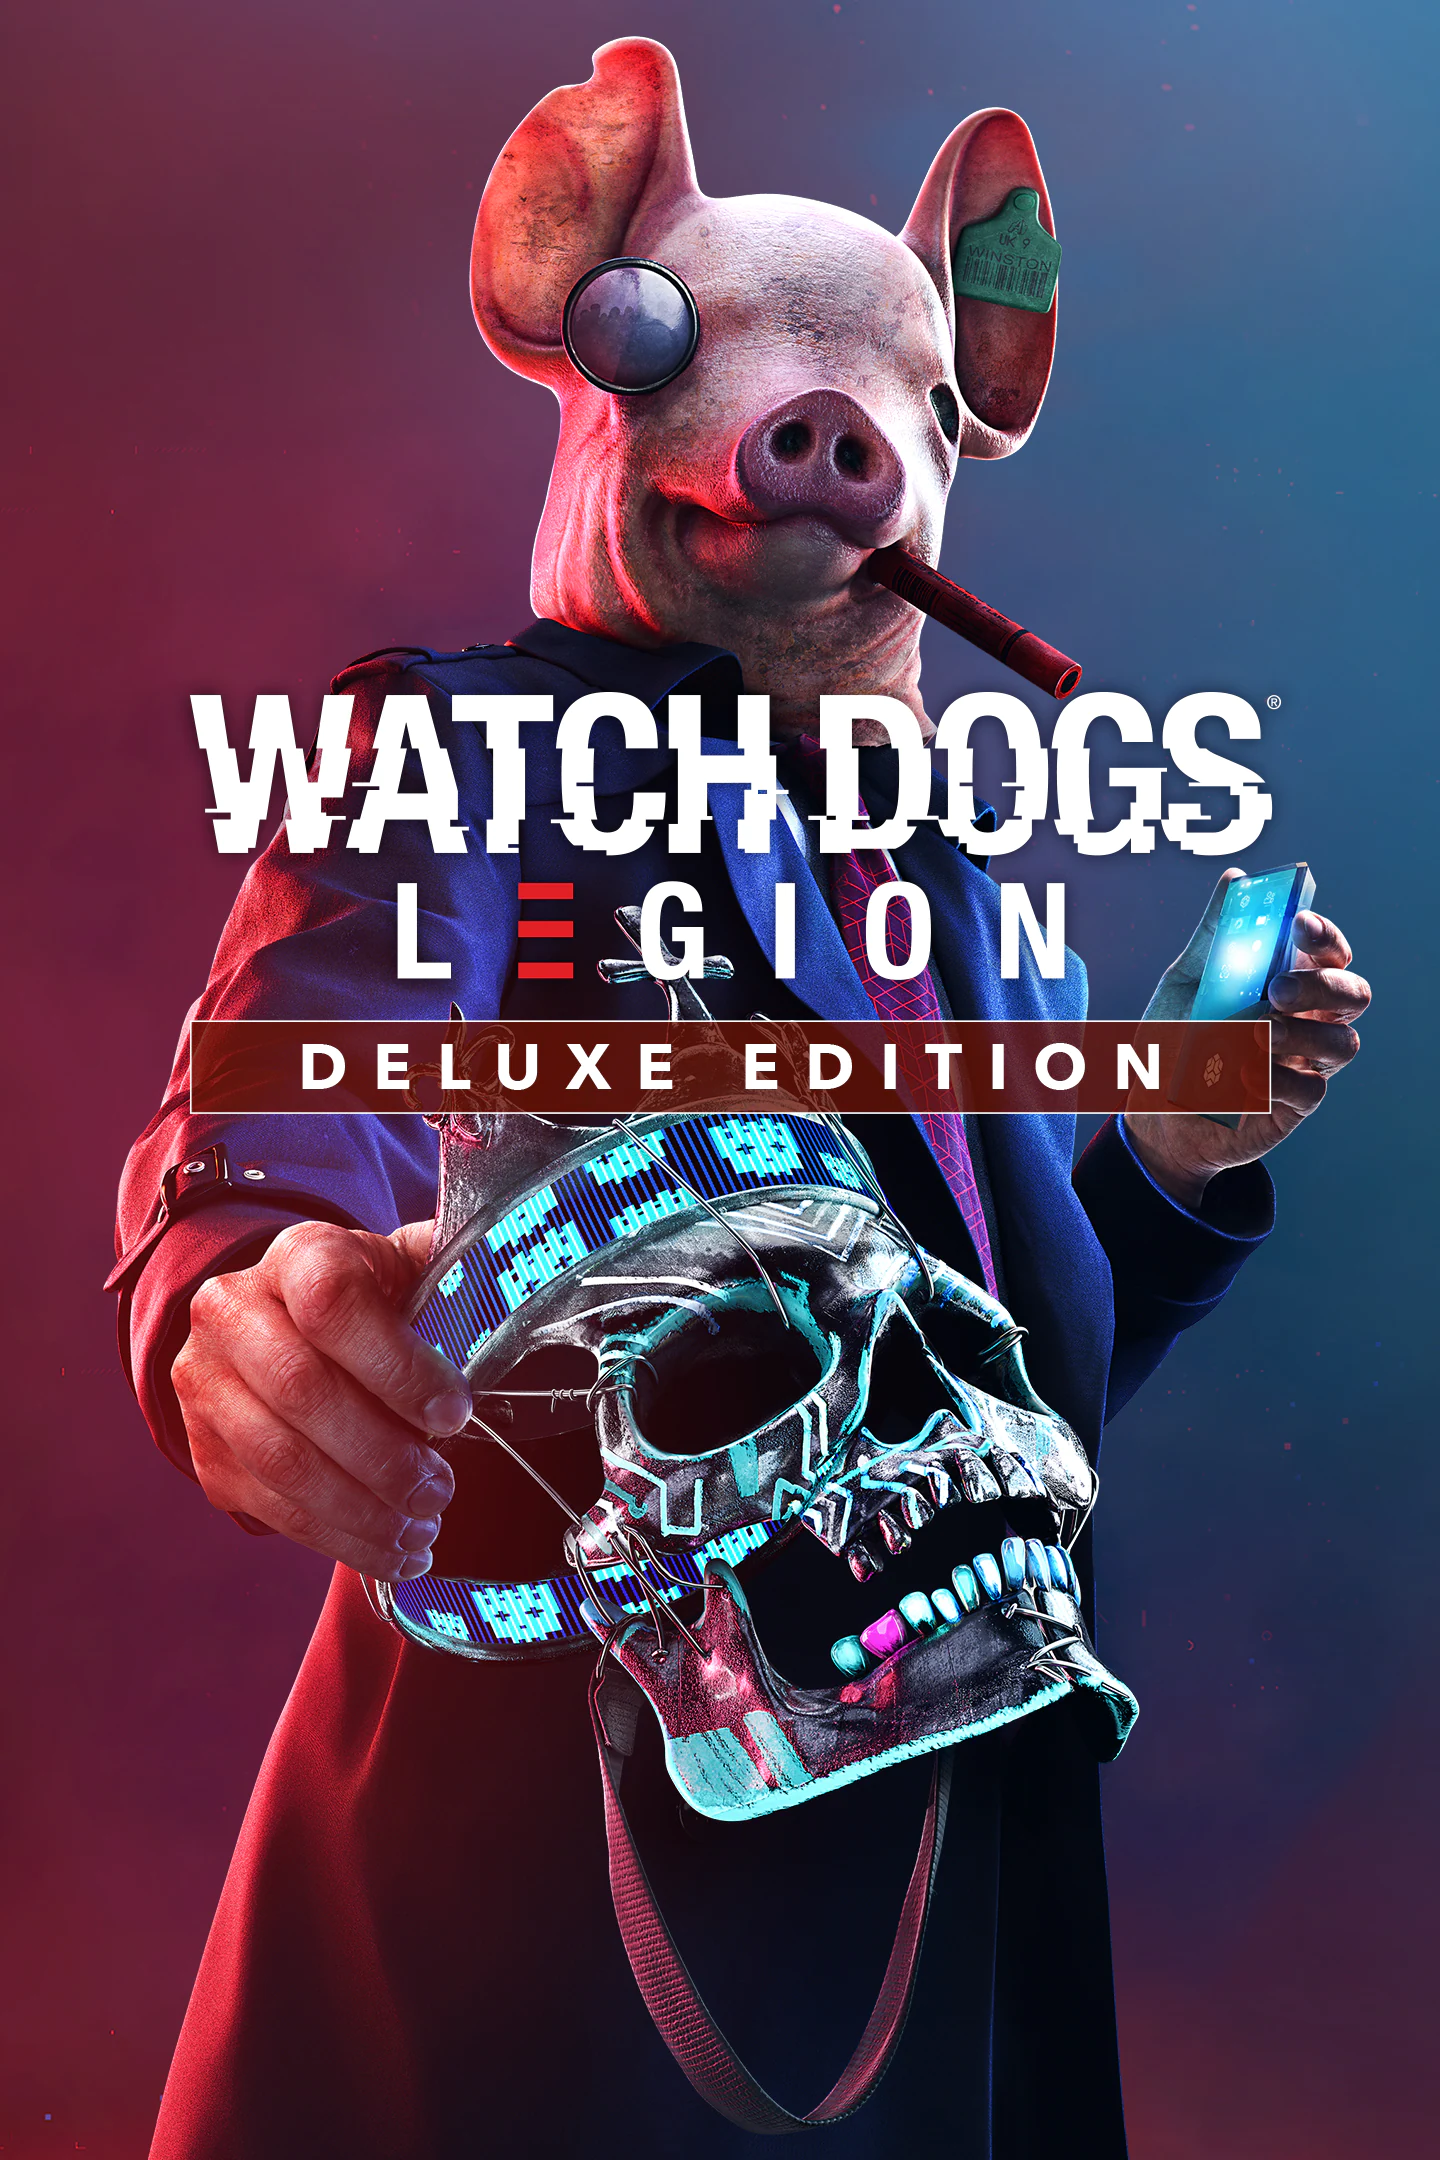 Watch Dogs Legion Deluxe Edition (AR) (Xbox One / Xbox Series X|S) - Xbox Live - Digital Code